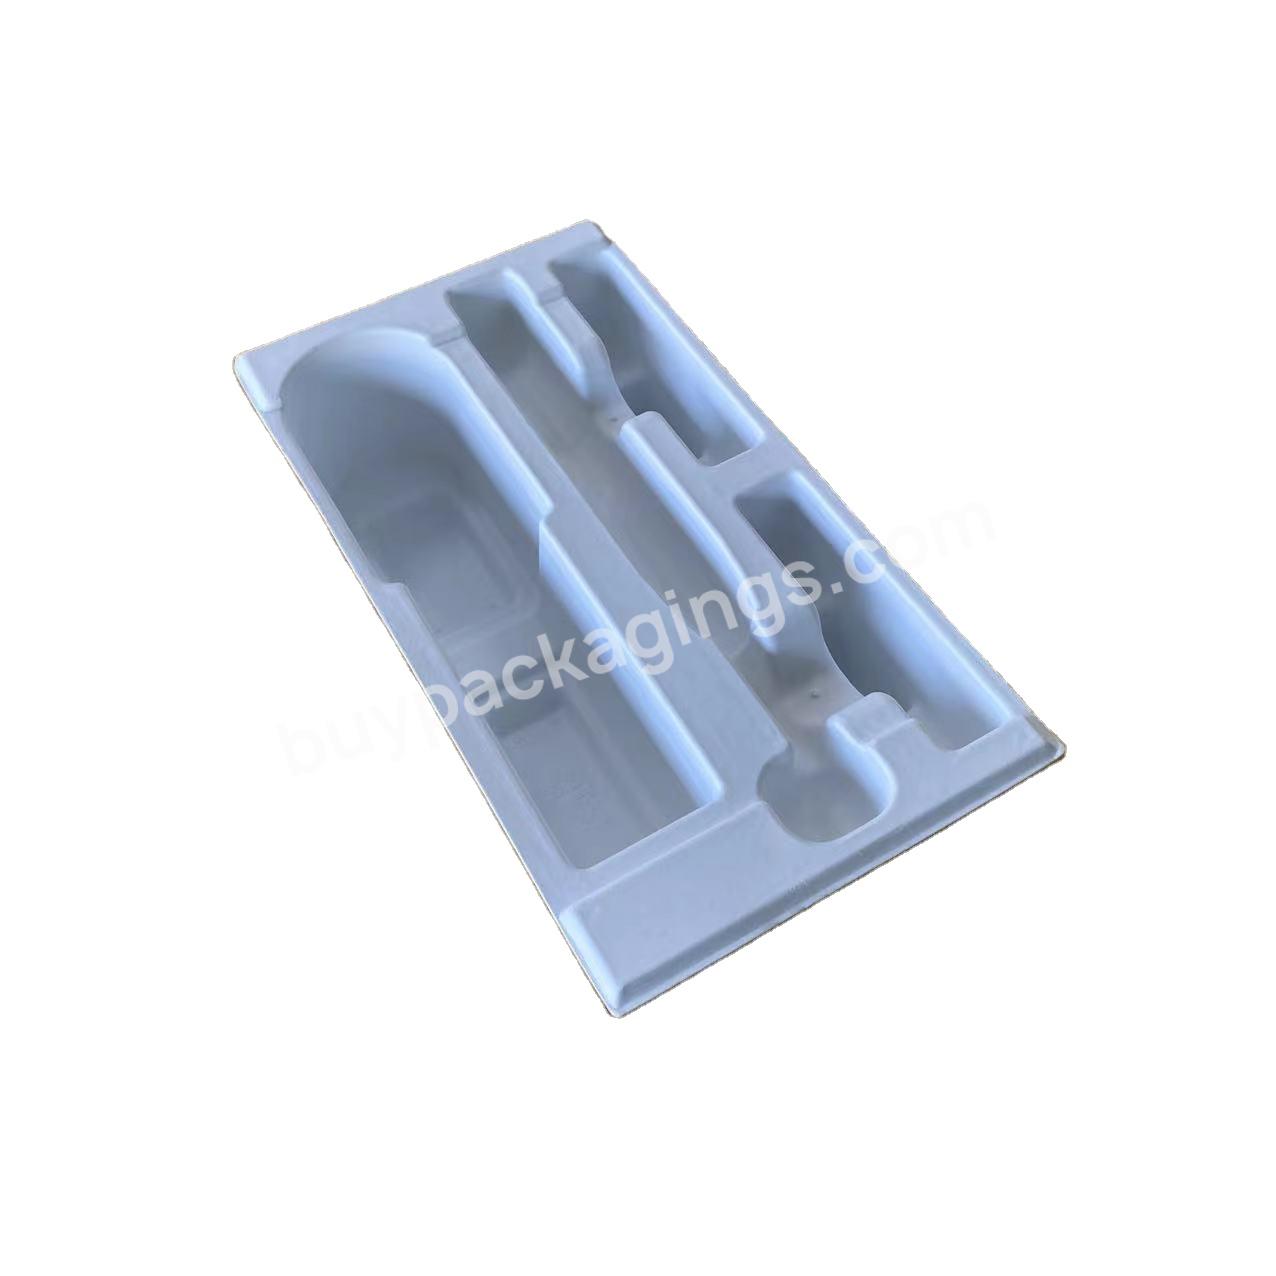 Biodegradable Custom Embossing Pulp Moulded Process Type Paper Trays For Electronic Inner Components Parts - Buy Electronic Toothbrushes Pulp Tray,Customized Molded Pulp Tray For Electric Toothbrush,Molded Pulp Toothbrushes Tray.